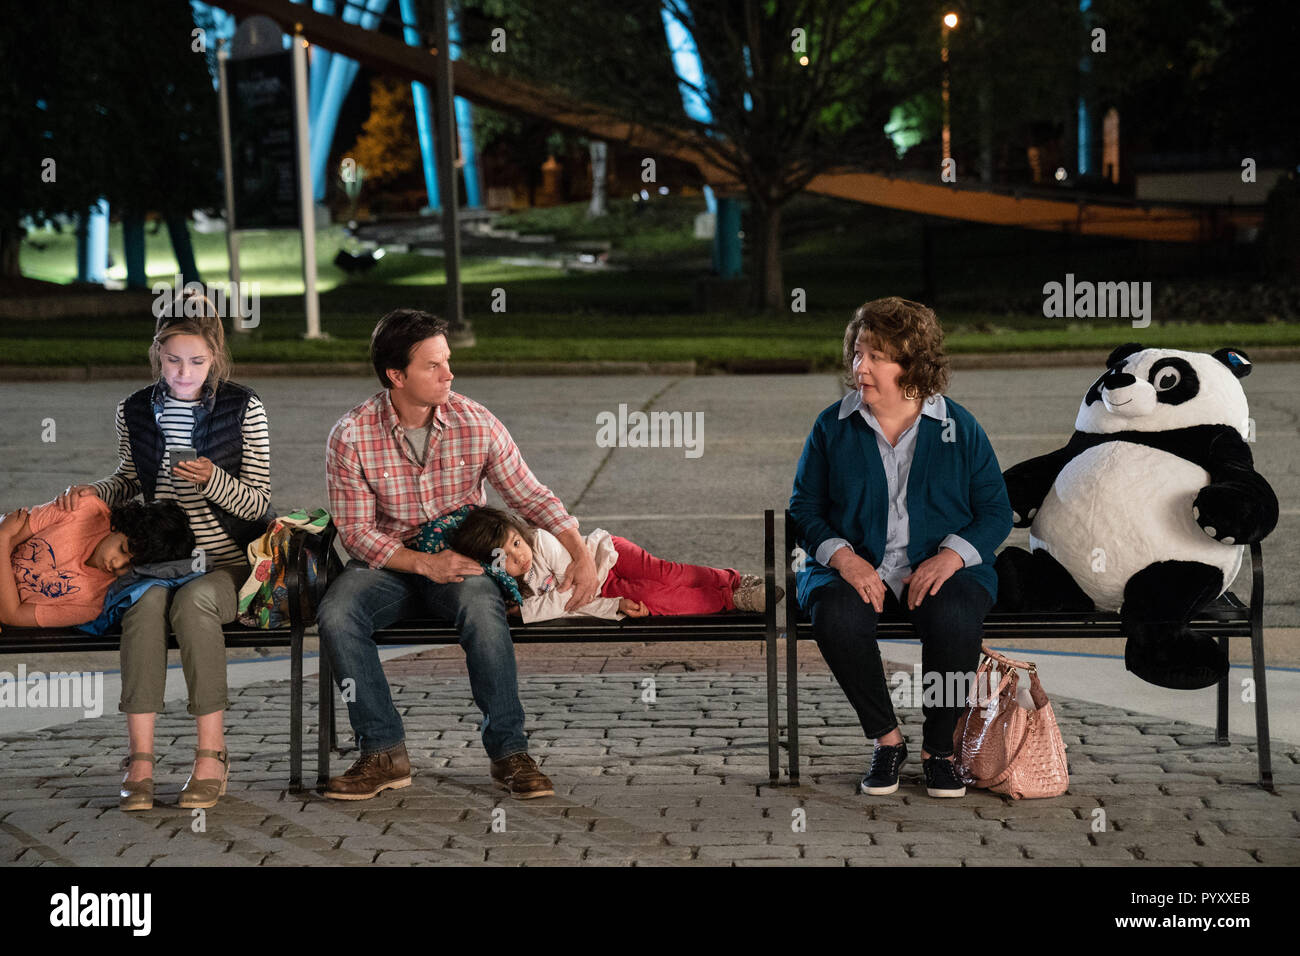 RELEASE DATE: November 16, 2018 TITLE: Instant Family STUDIO: Paramount Pictures DIRECTOR: Sean Anders PLOT: A couple find themselves in over their heads when they adopt three children. STARRING: GUSTAVO QUIROZ as Juan, JULIANNA GAMIZ as Lita, MARK WAHLBERG as Pete, ROSE BYRNE as Ellie and MARGO MARTINDALE as Grandma Sandy. (Credit Image: © Paramount Pictures/Entertainment Pictures) Stock Photo